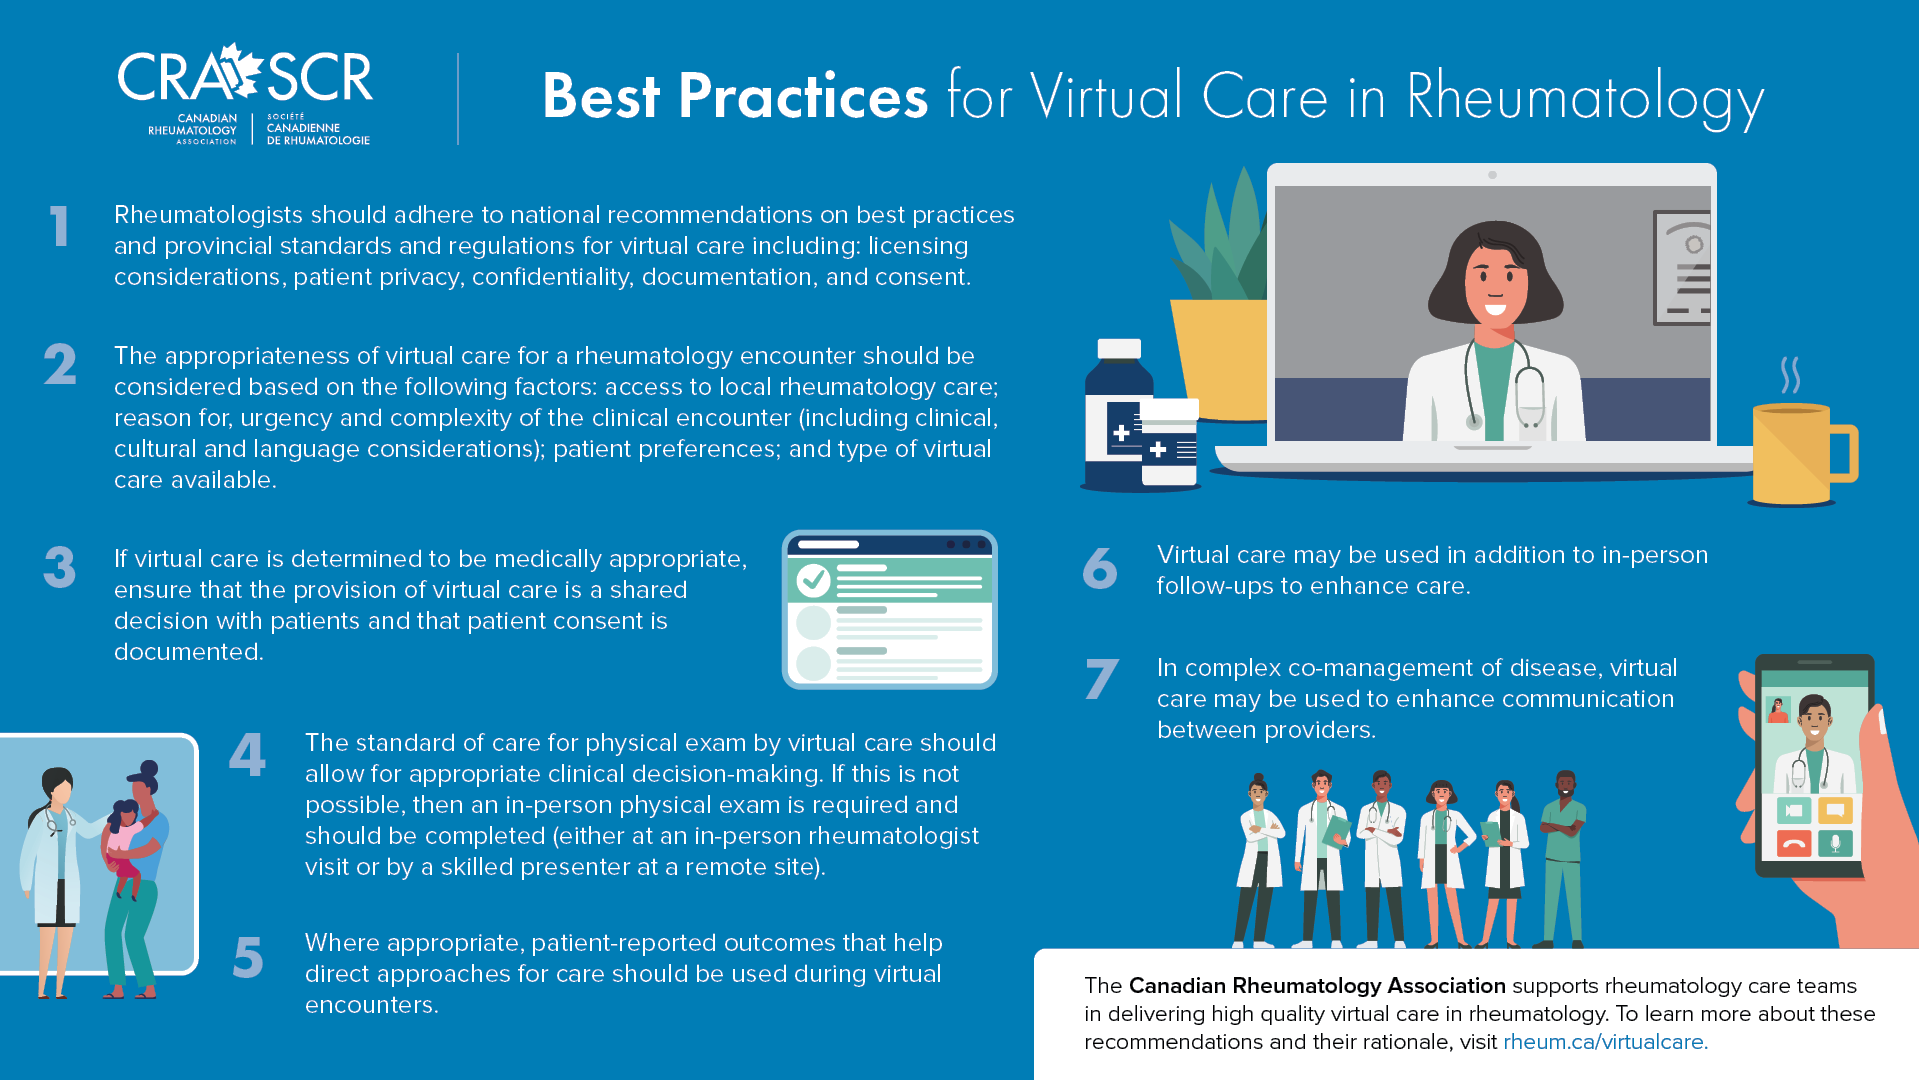 Best Practices for Virtual Care in Rheumatology